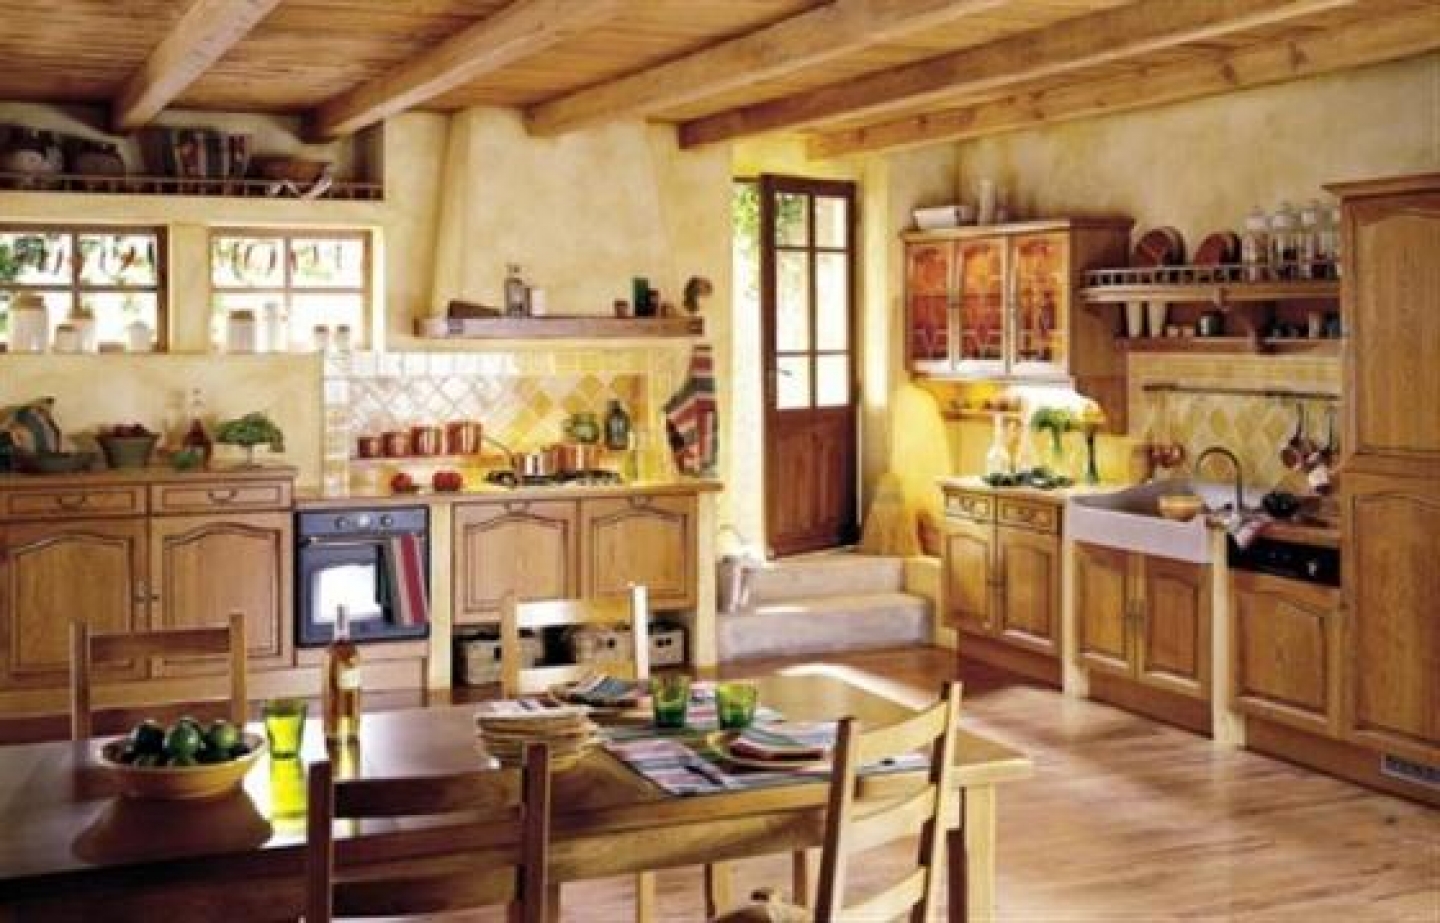 Give a decent look to your kitchen – 21 amazing French country kitchen cabinets design ideas